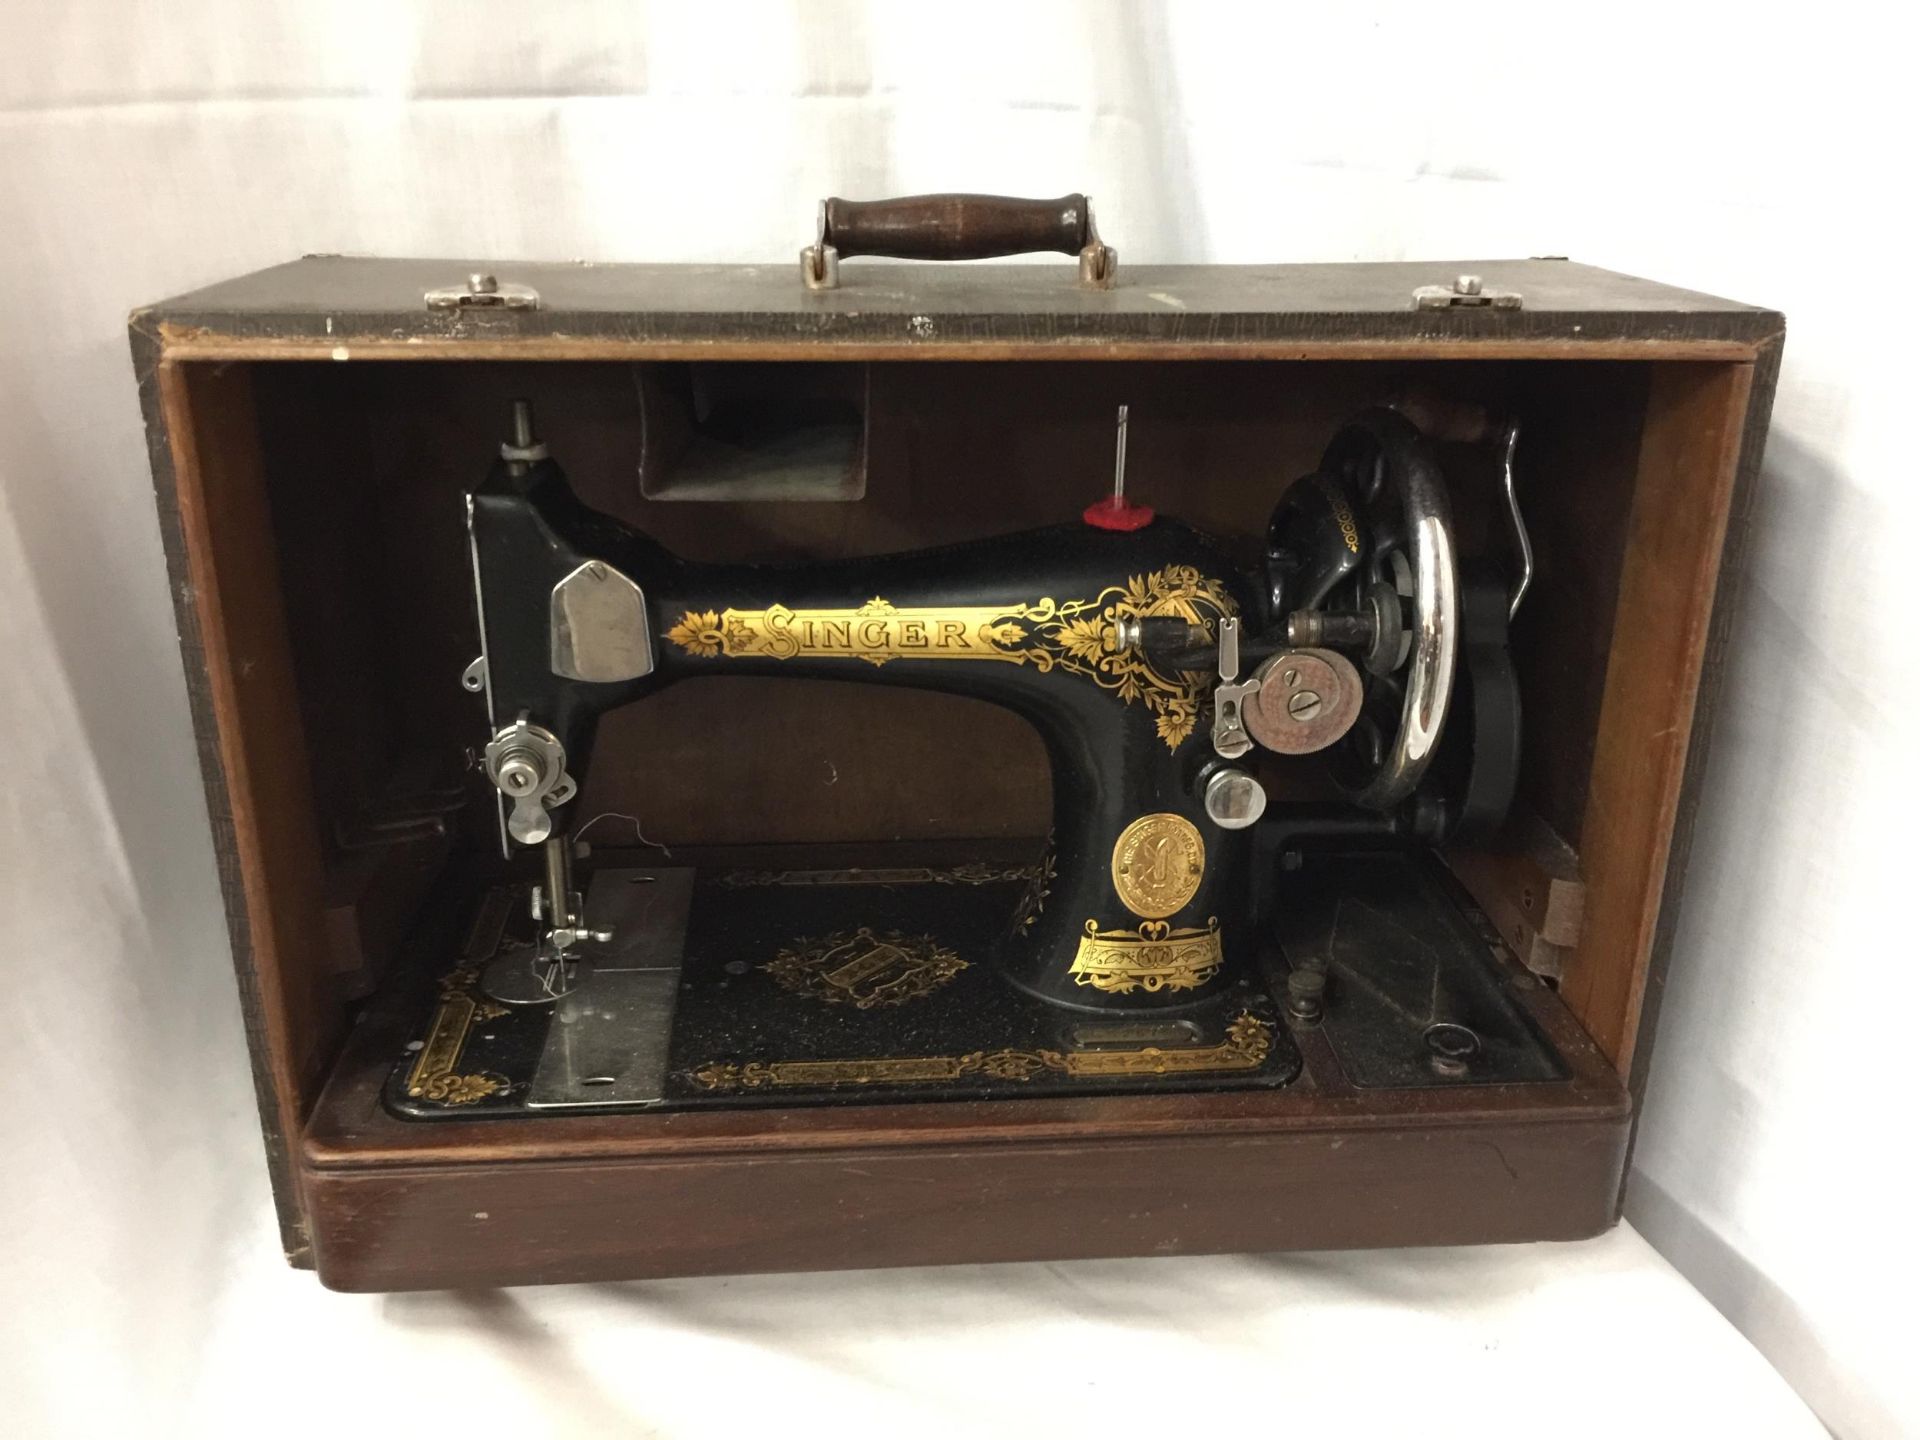 A BOXED VINTAGE SINGER SEWING MACHINE, SERIAL NUMBER EC625798 (WITH FRONT COVER)